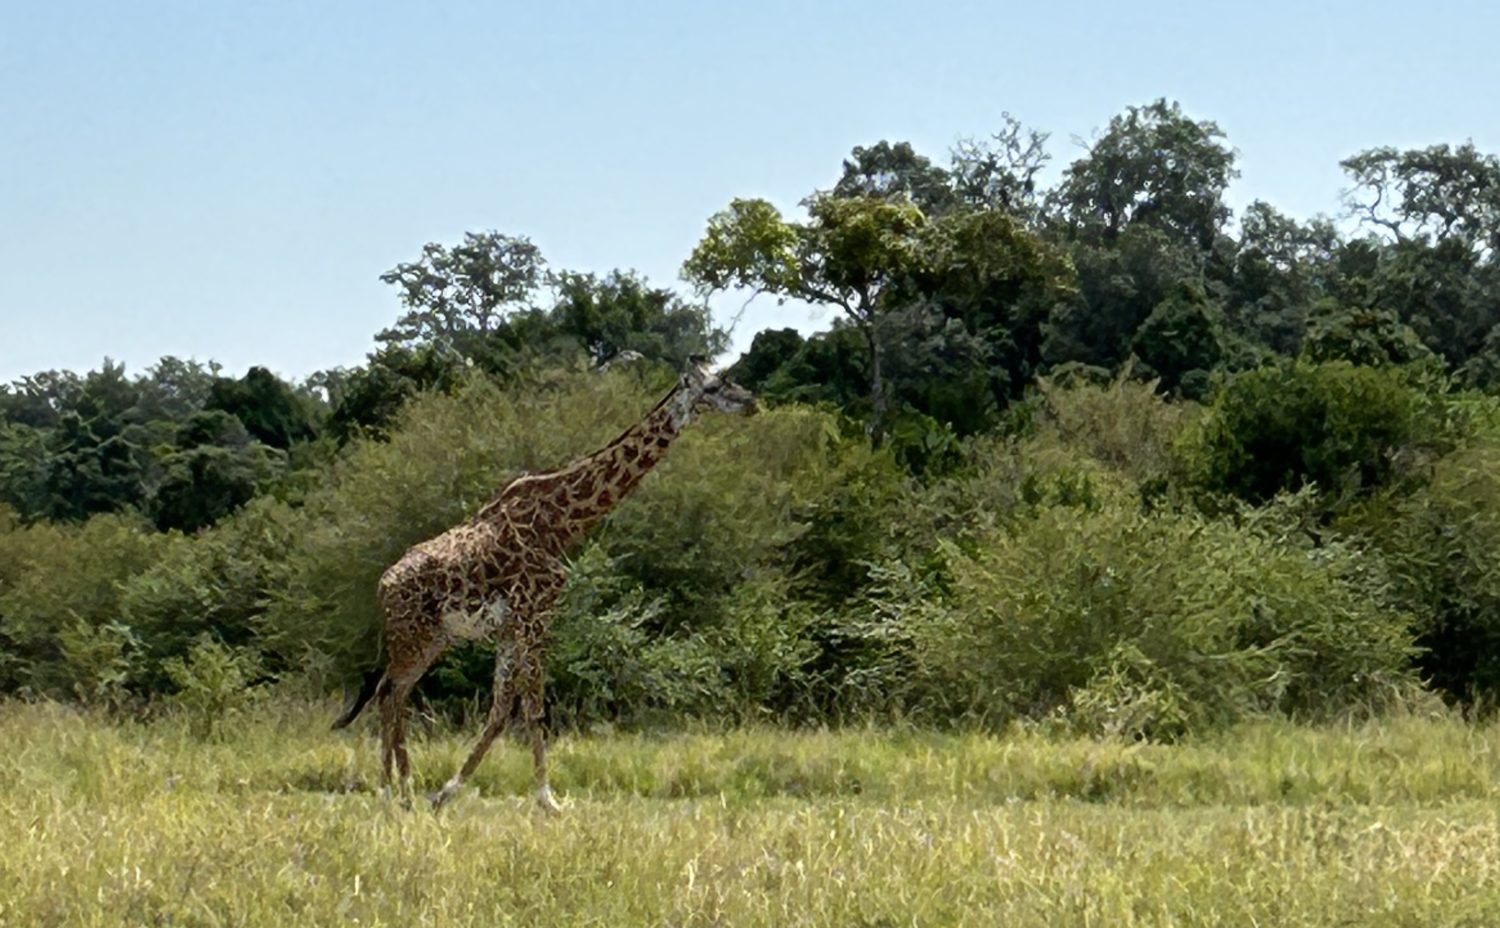 A group of giraffe standing on top of a lush green field